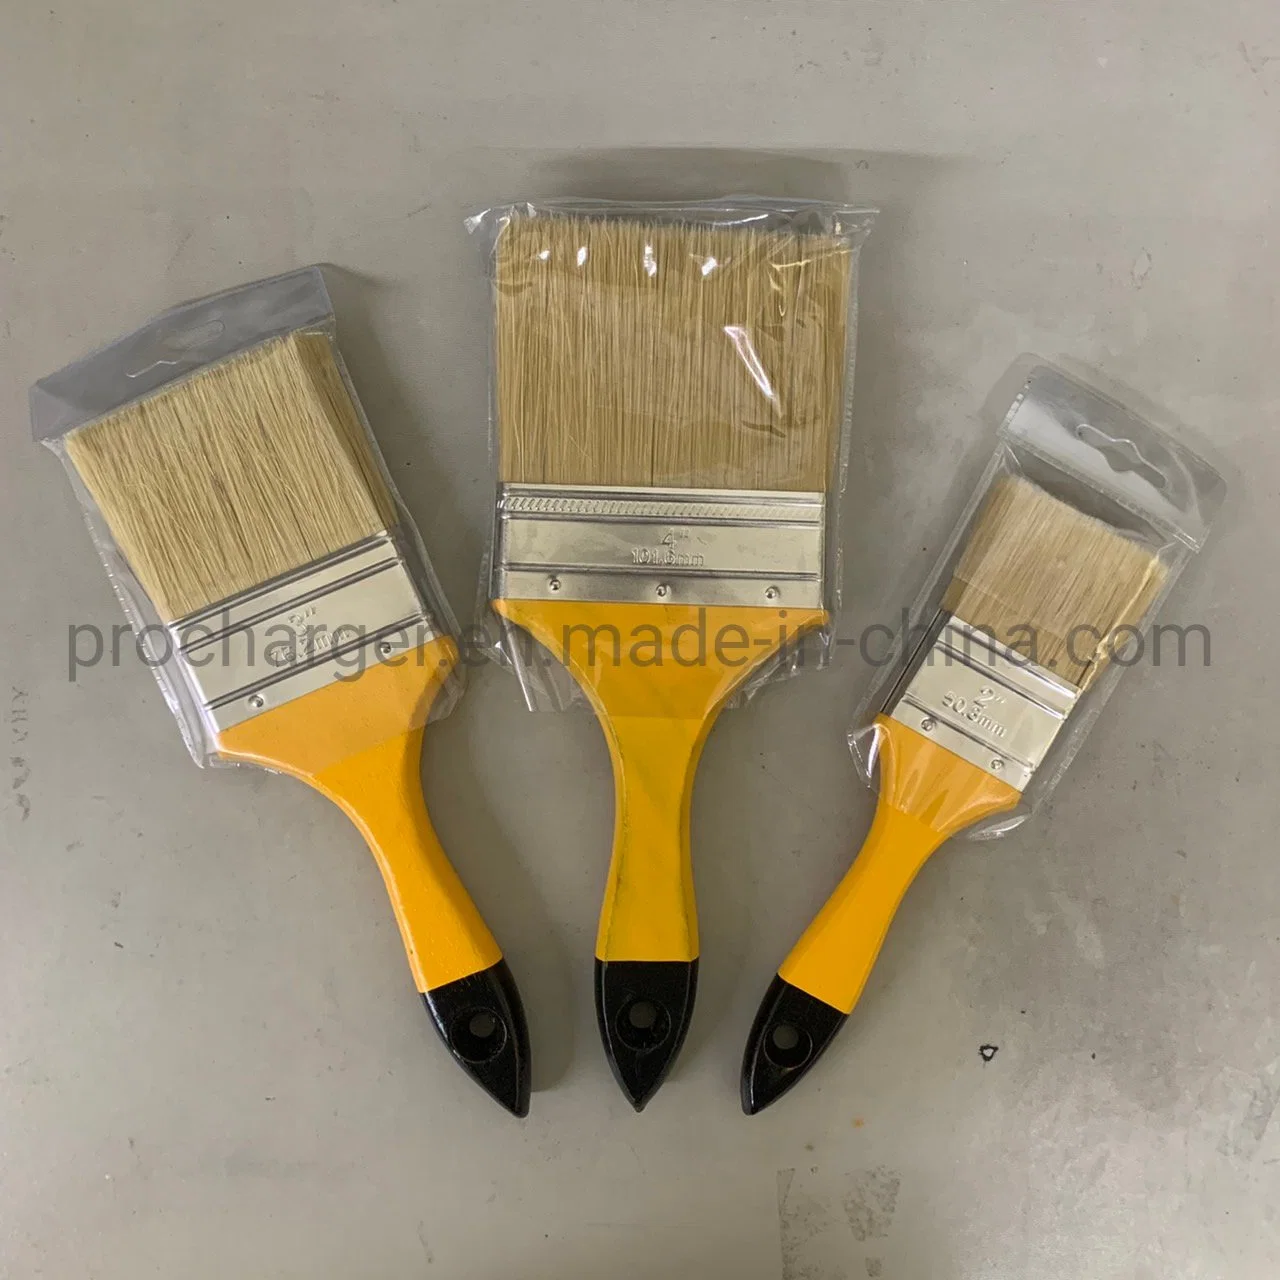 Hot Sale 1/2" to 4" Flat Paint Brush with Yellow Wooden Handle Brush